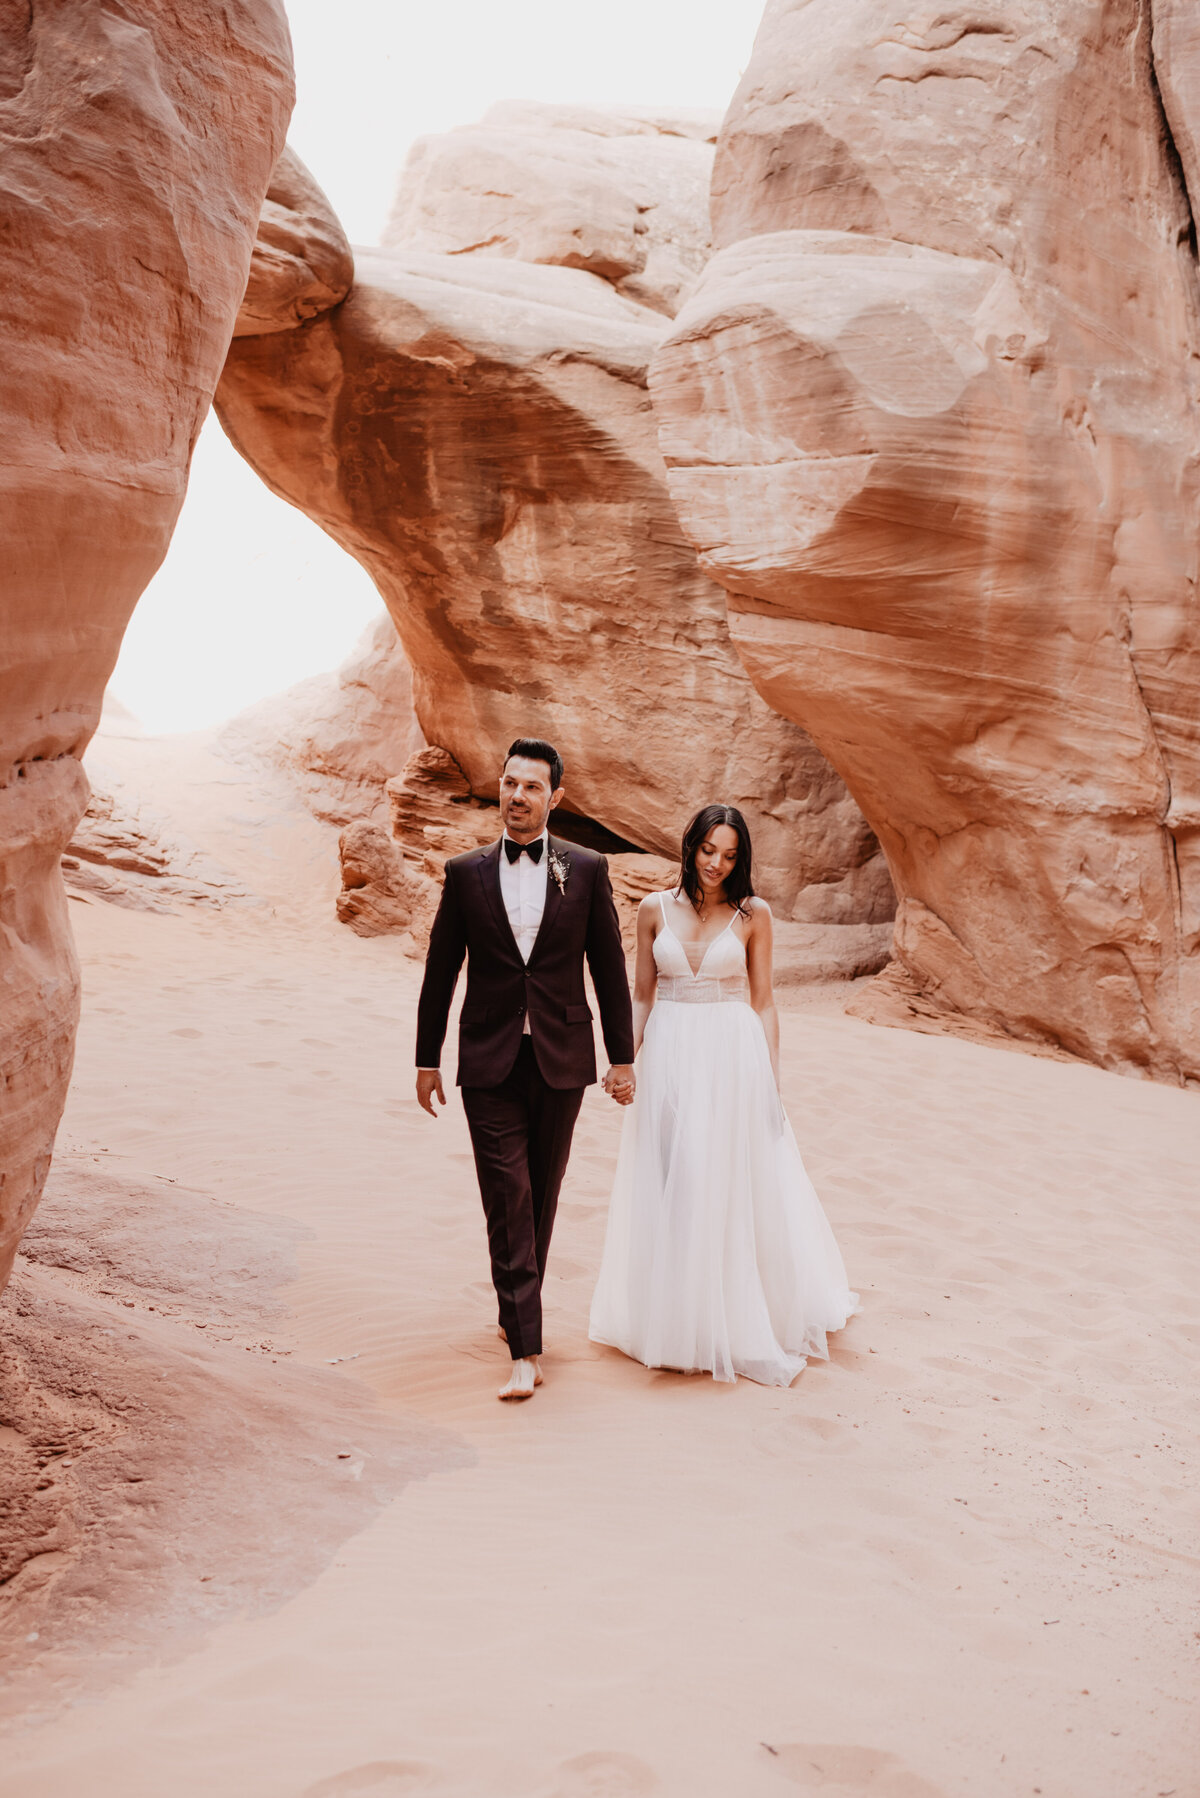 Utah elopement photographer captures husband and wife holding hands and walking together